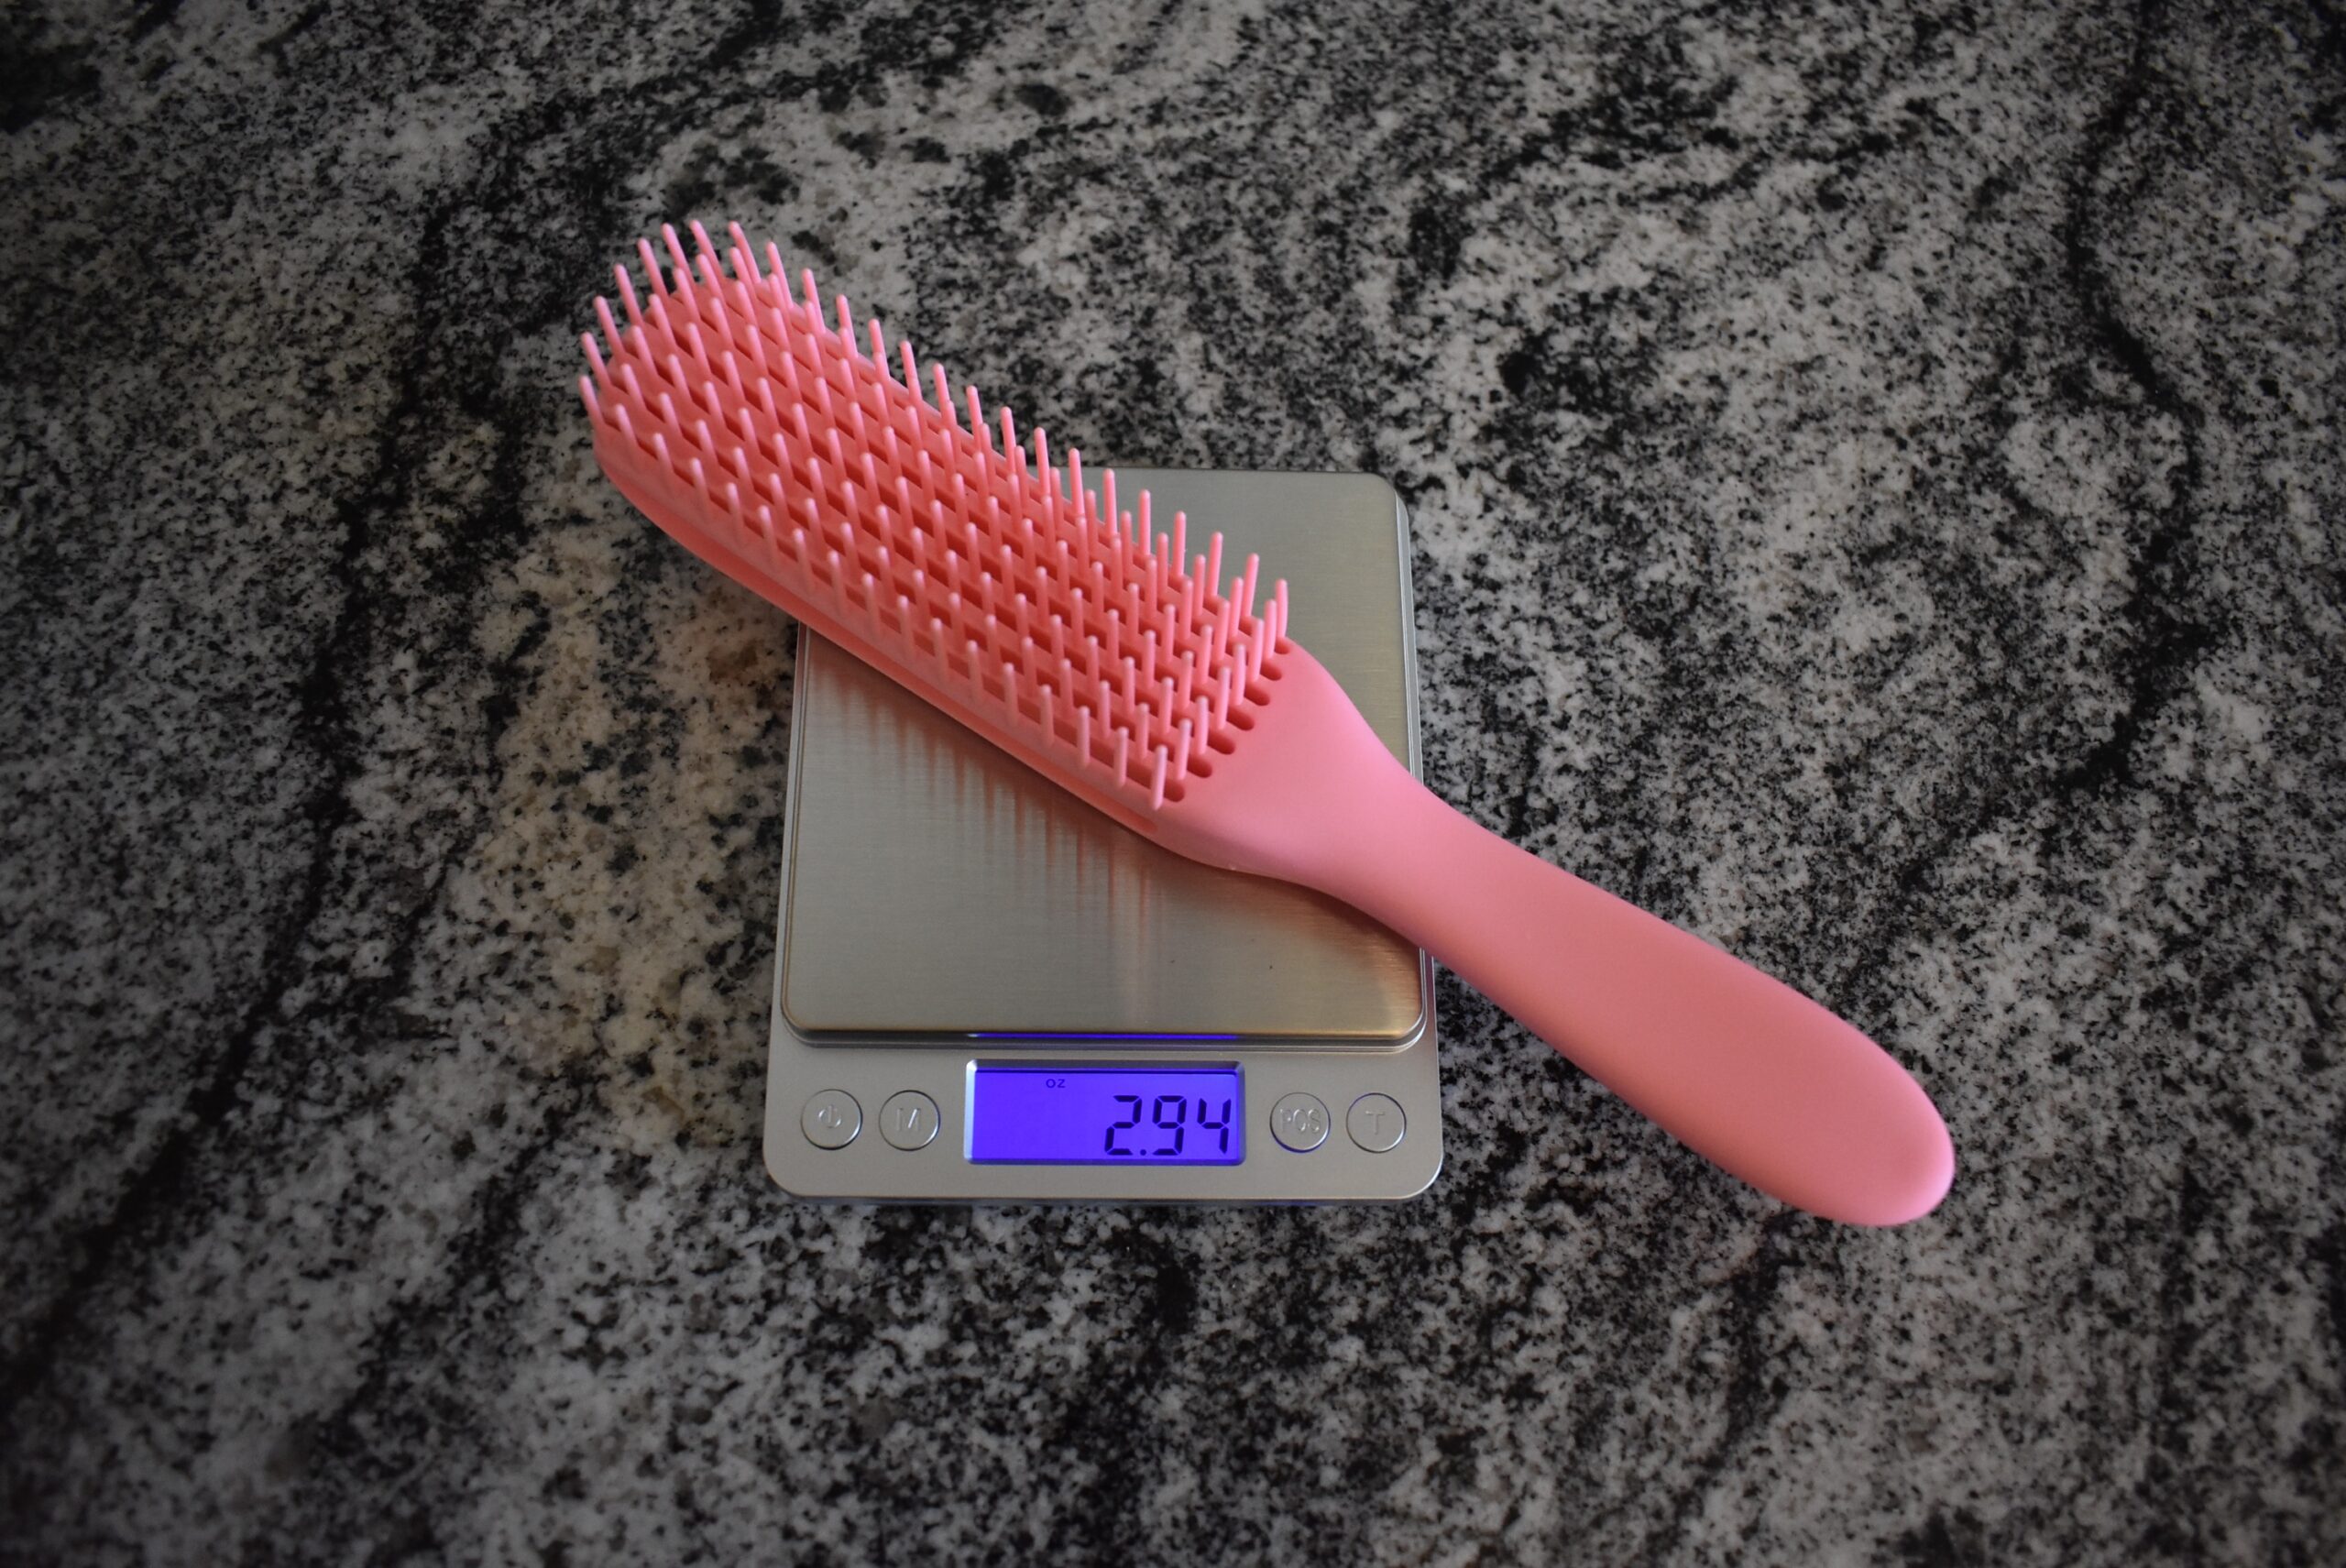 The best detangling brush in pink registering 2.94 oz on the scale on a granite counter